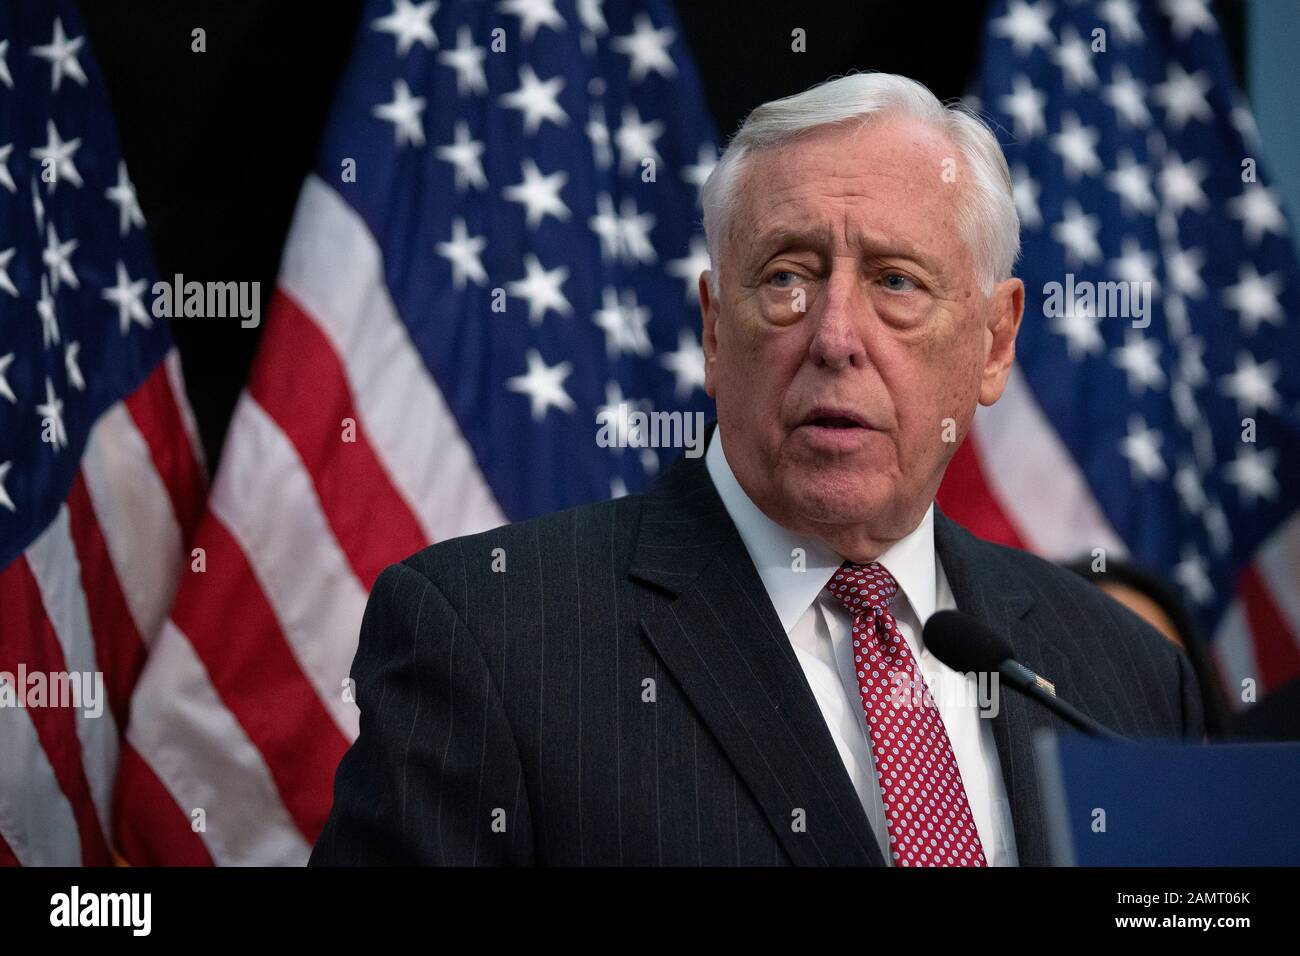 Washington, DC, USA. 14th Jan, 2020. United States House Majority Leader Steny Hoyer (Democrat of Maryland) delivers remarks regarding the ten year anniversary of the Citizens United decision at the United States Capitol in Washington, DC, U.S., on Tuesday, January 14, 2020. The highly controversial decision regarding campaign finance is seen by some as a victory for free speech, while others feel it gives special interest groups too much power in Washington. Credit: Stefani Reynolds/CNP | usage worldwide Credit: dpa/Alamy Live News Stock Photo